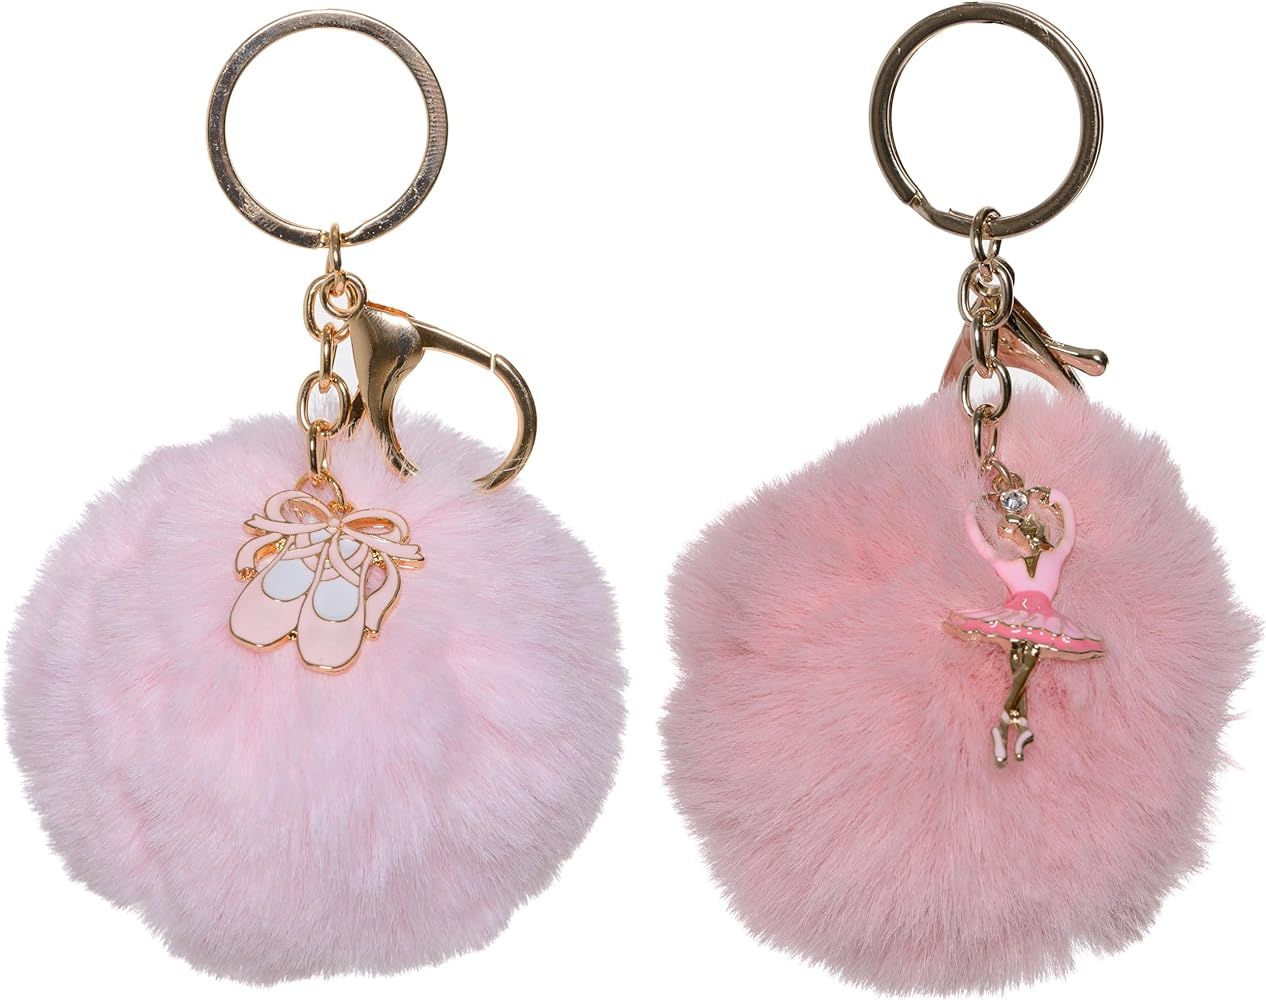 Dreams and Whispers Faux Fur Ball Pom Pom Key Chain Ring for Women Girls Bag Pendant | Amazon (US)